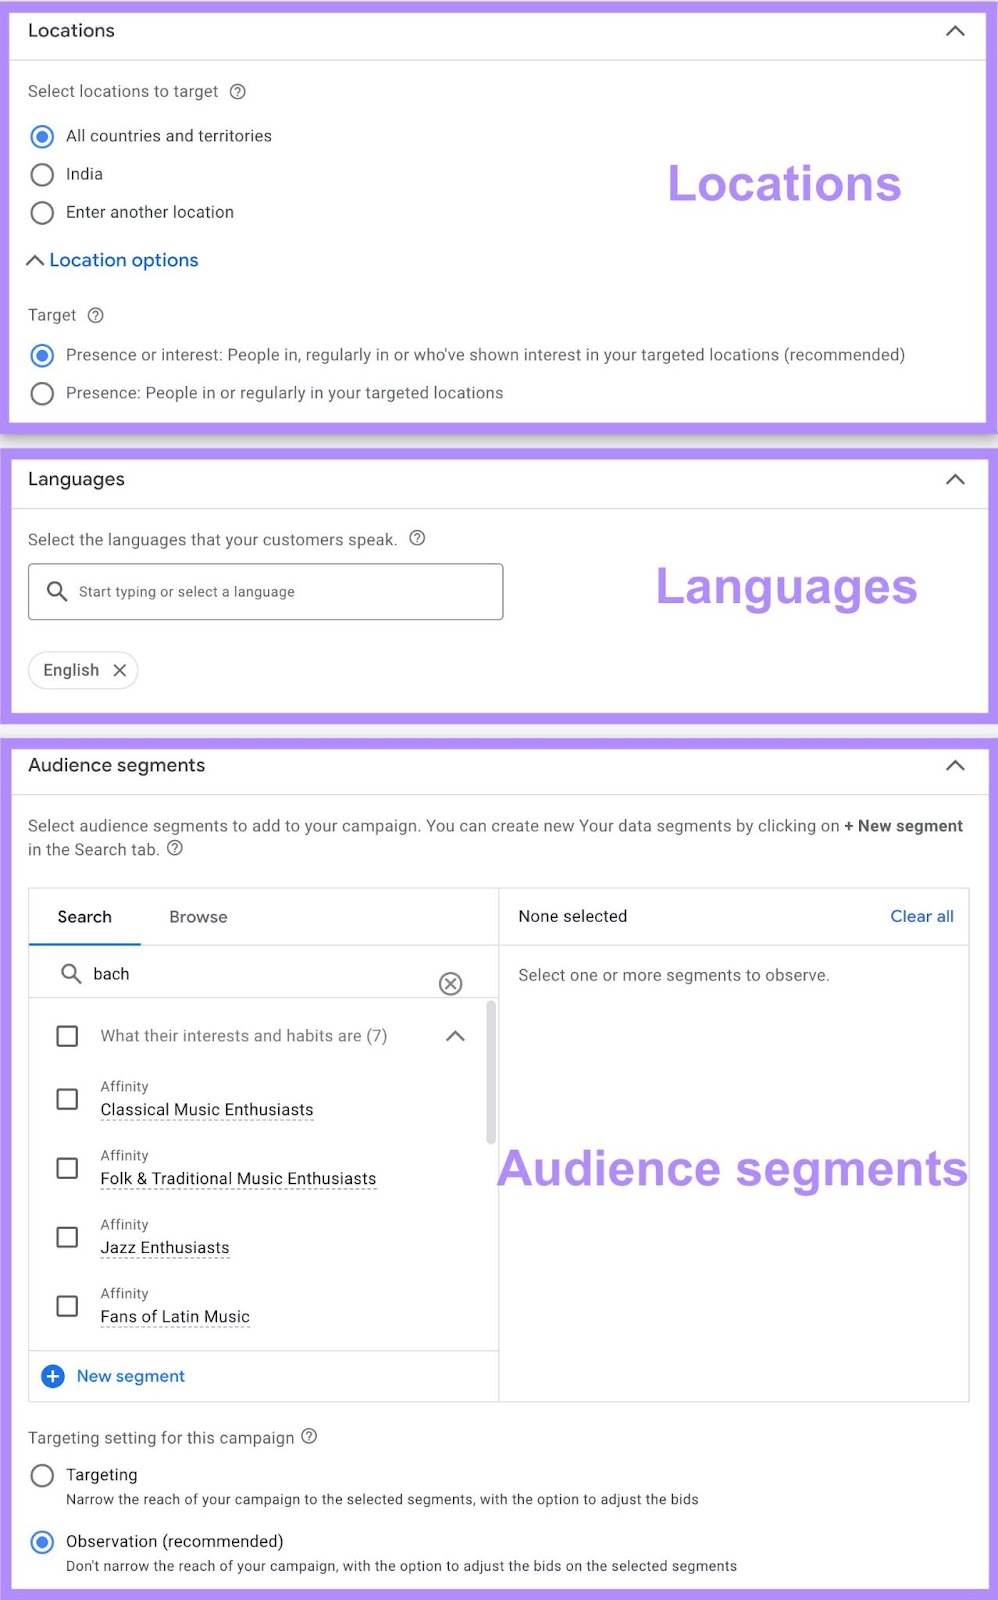 Location, languages and assemblage  segments run  settings successful  Google Ads